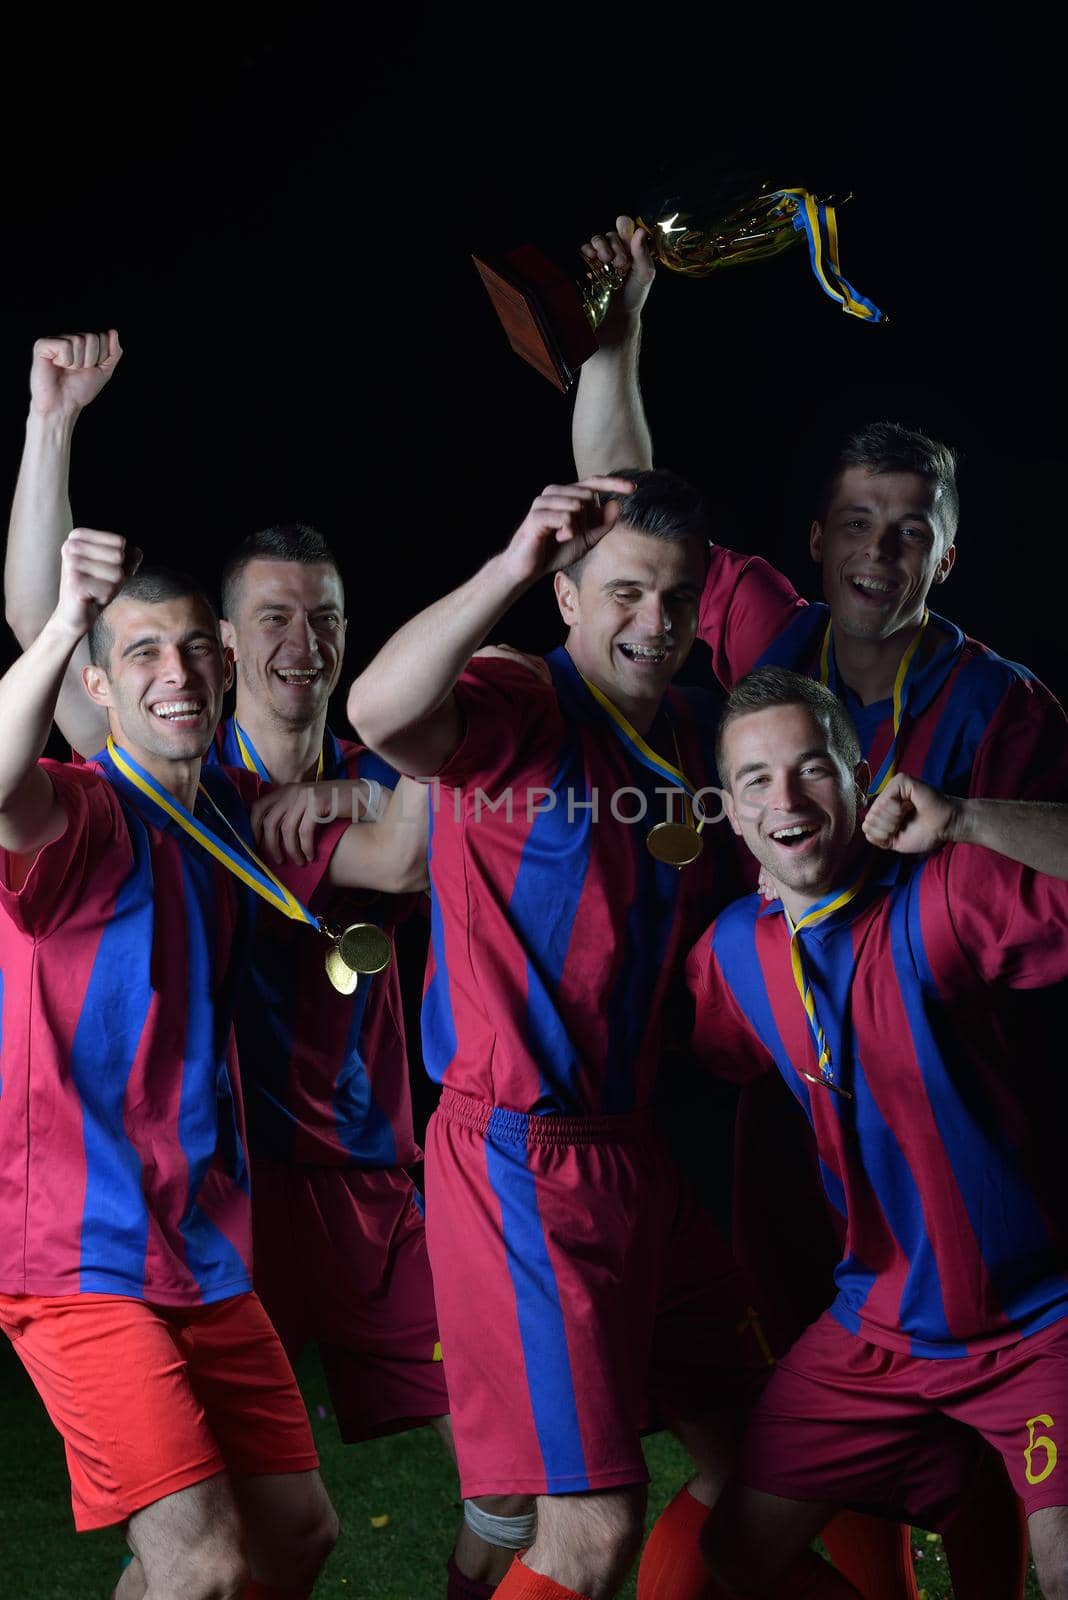 soccer players team group celebrating the victory and become champion of game while holding win coup